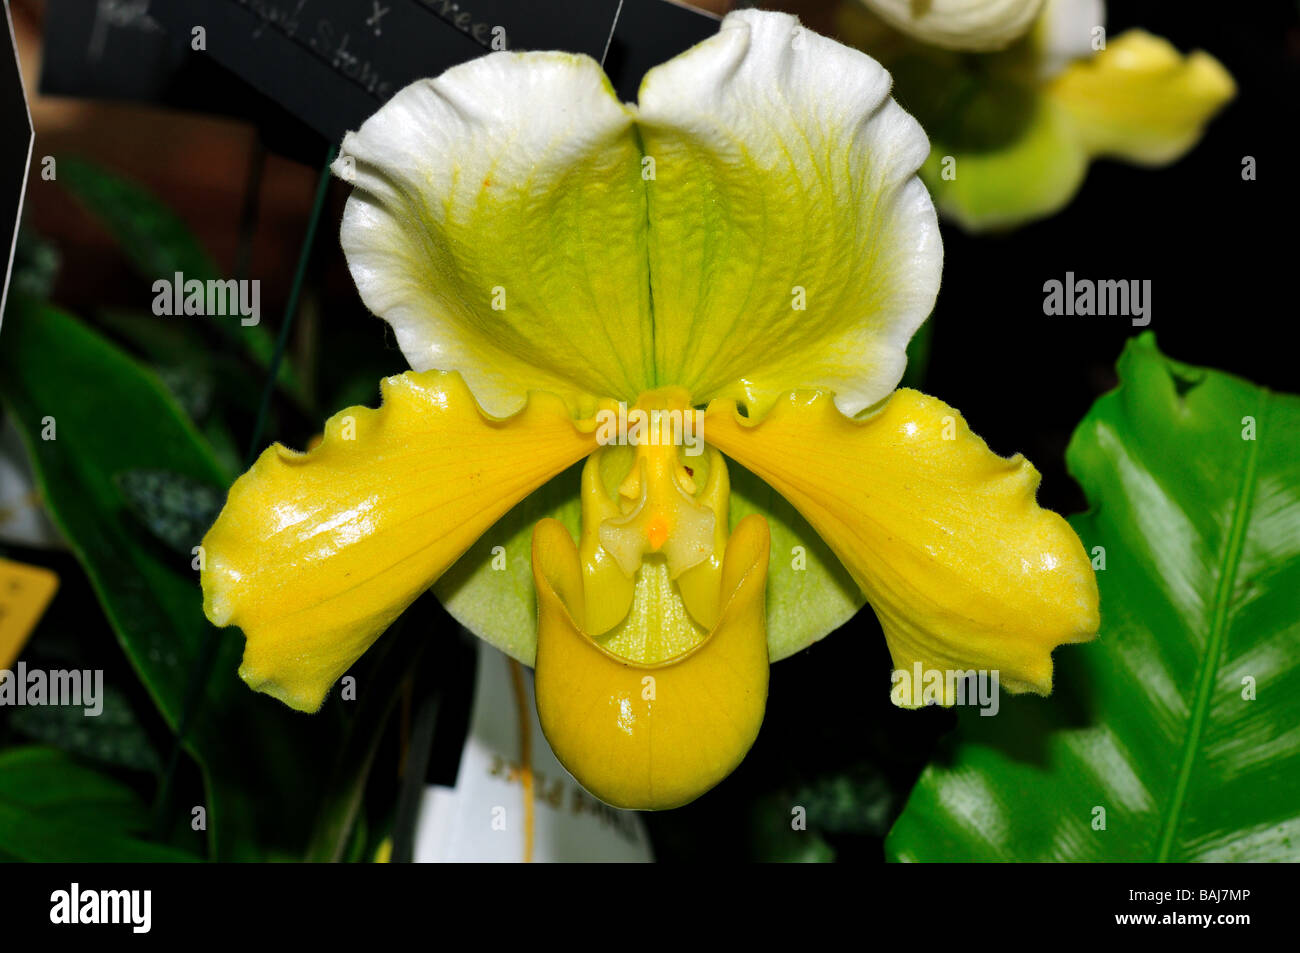 Orchid flower. Yellow green lady's slippers. Stock Photo